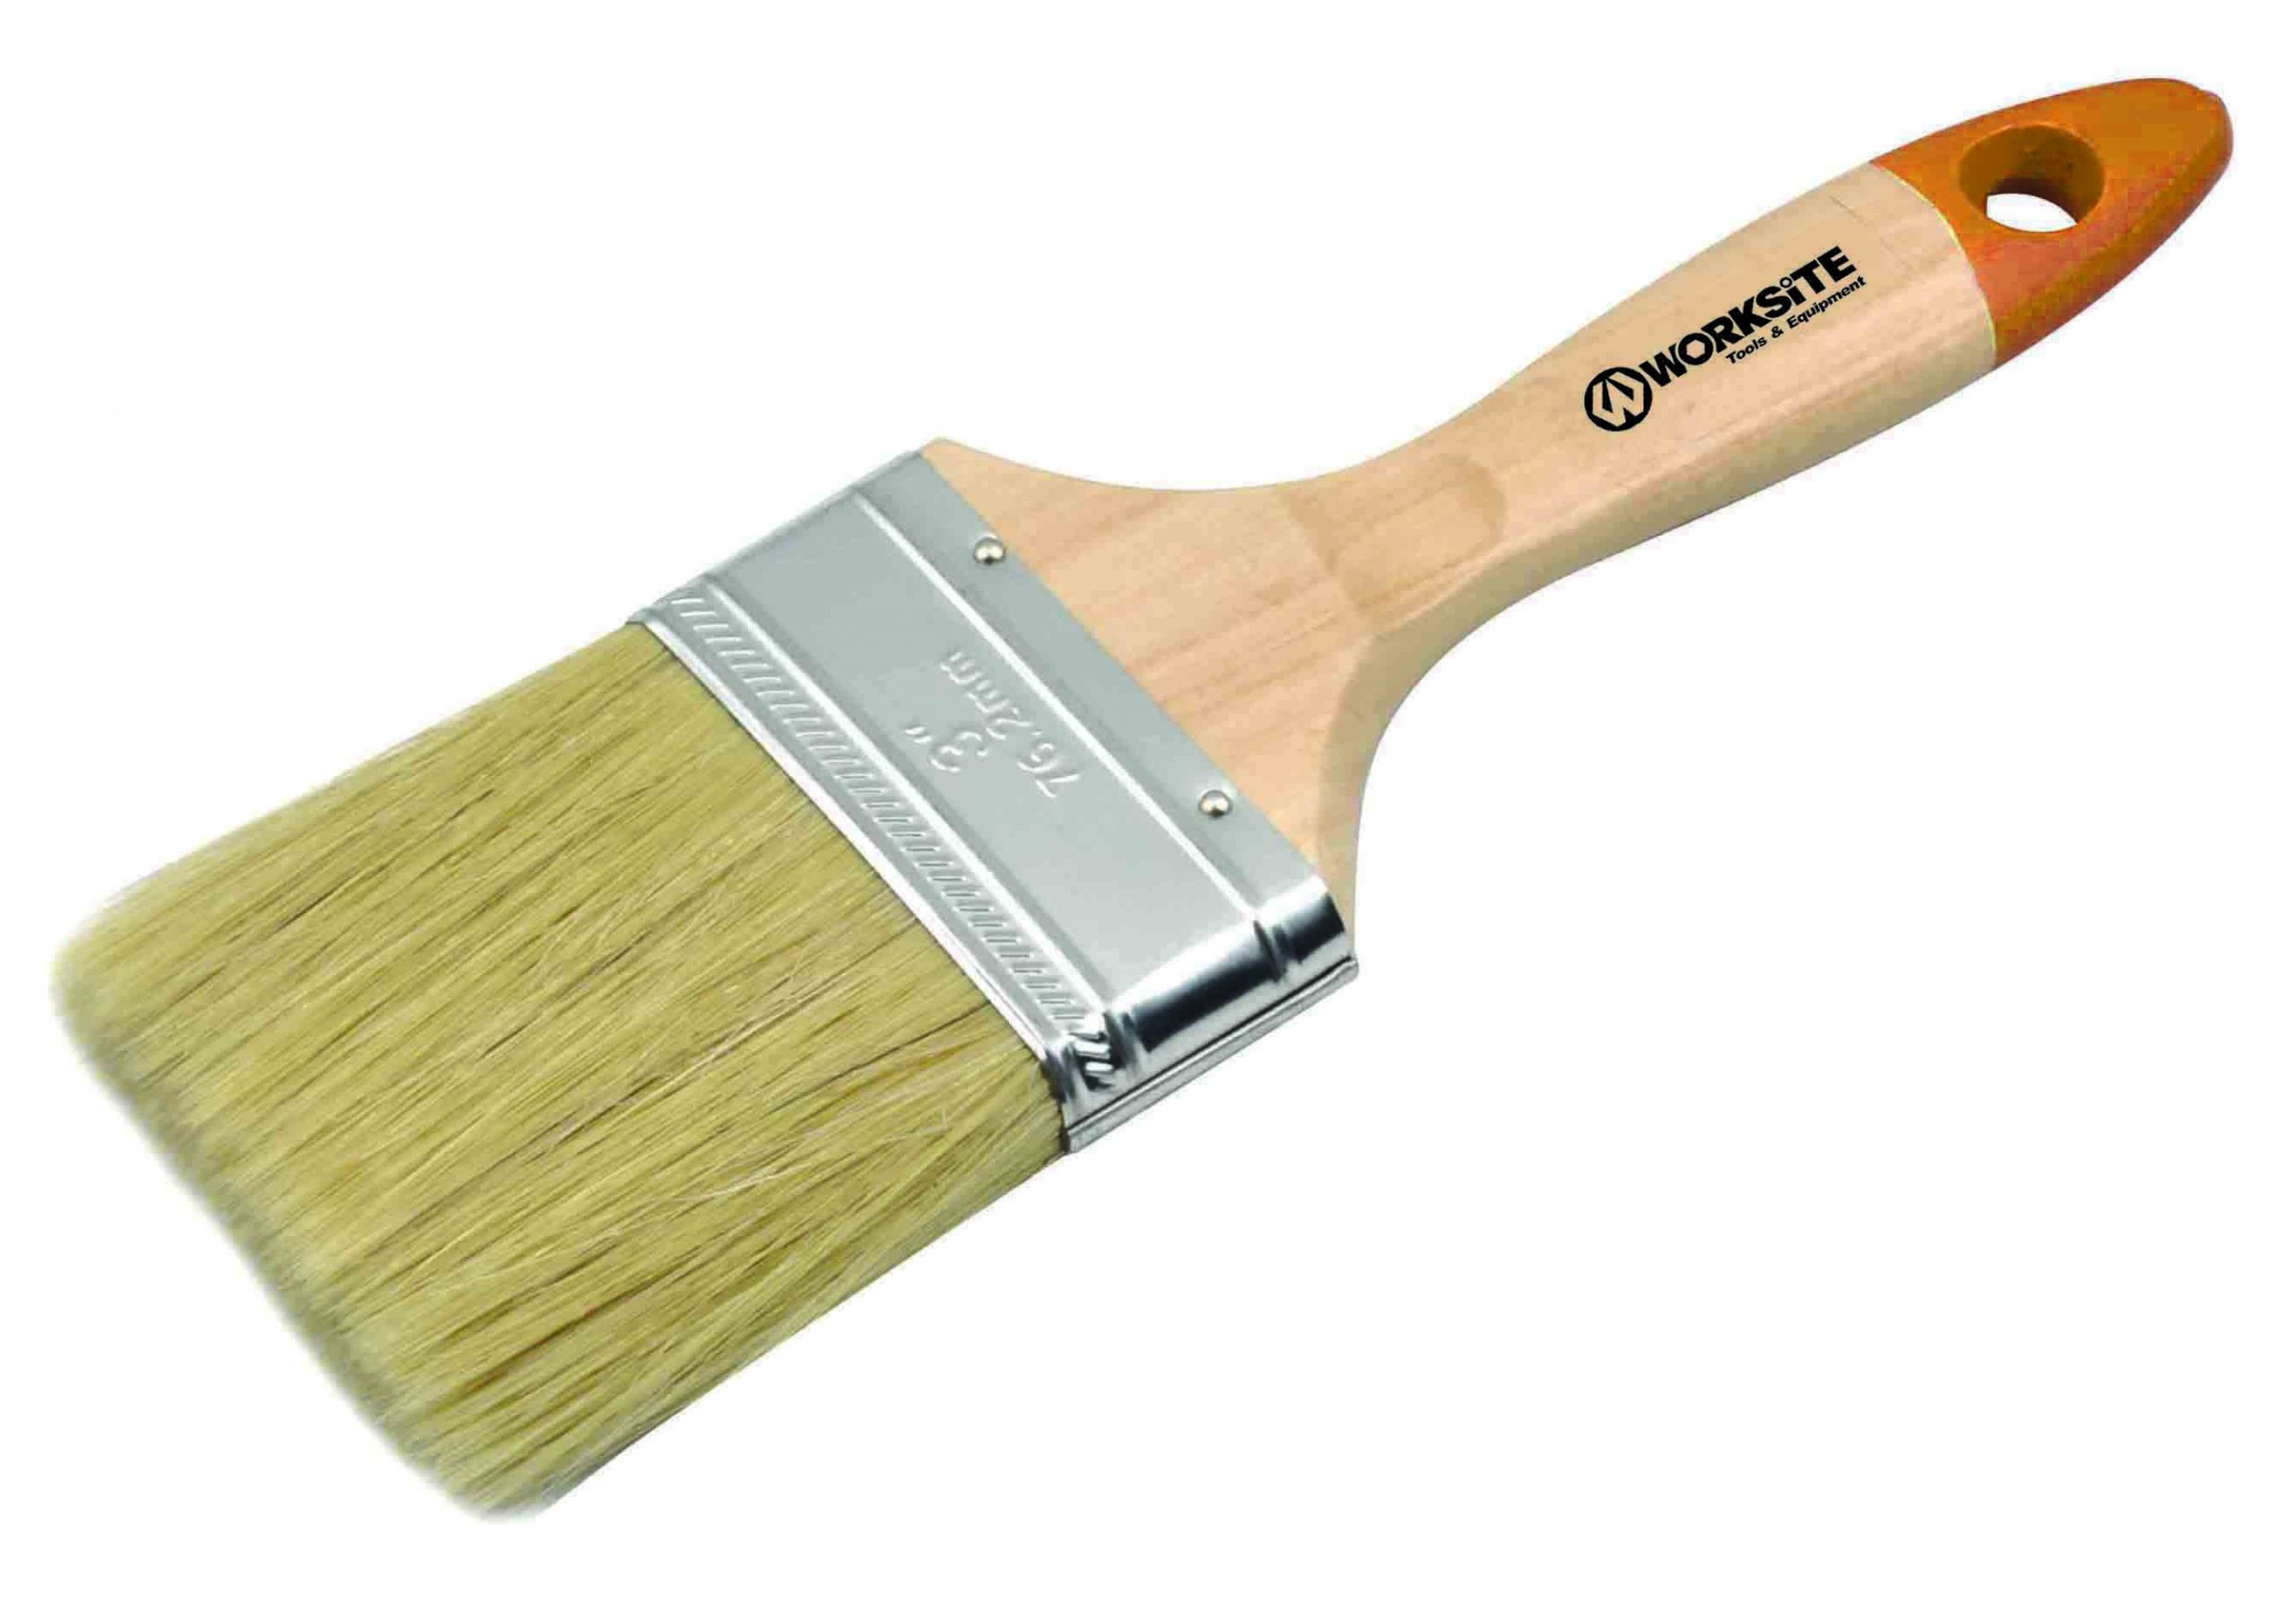 Worksite 2 Inch Paint Brush With Solid Wooden Handles, Designed For Comfort And Easy Control. Natural White Bristles Is Best With Oil Based Liquids And Designed To Save Time With Less Streaks And Premium Finish. Perfect For Small Staining Projects And Flat Surface Painting. Recommend The Use For Painting Edges, Trim, Sashes And Sills. Use On Floors, Paneling, Walls, Ceiling, Cabinets, Doors And Tables To Decorate Your Bedroom, Kitchen And Bathroom. WT8087